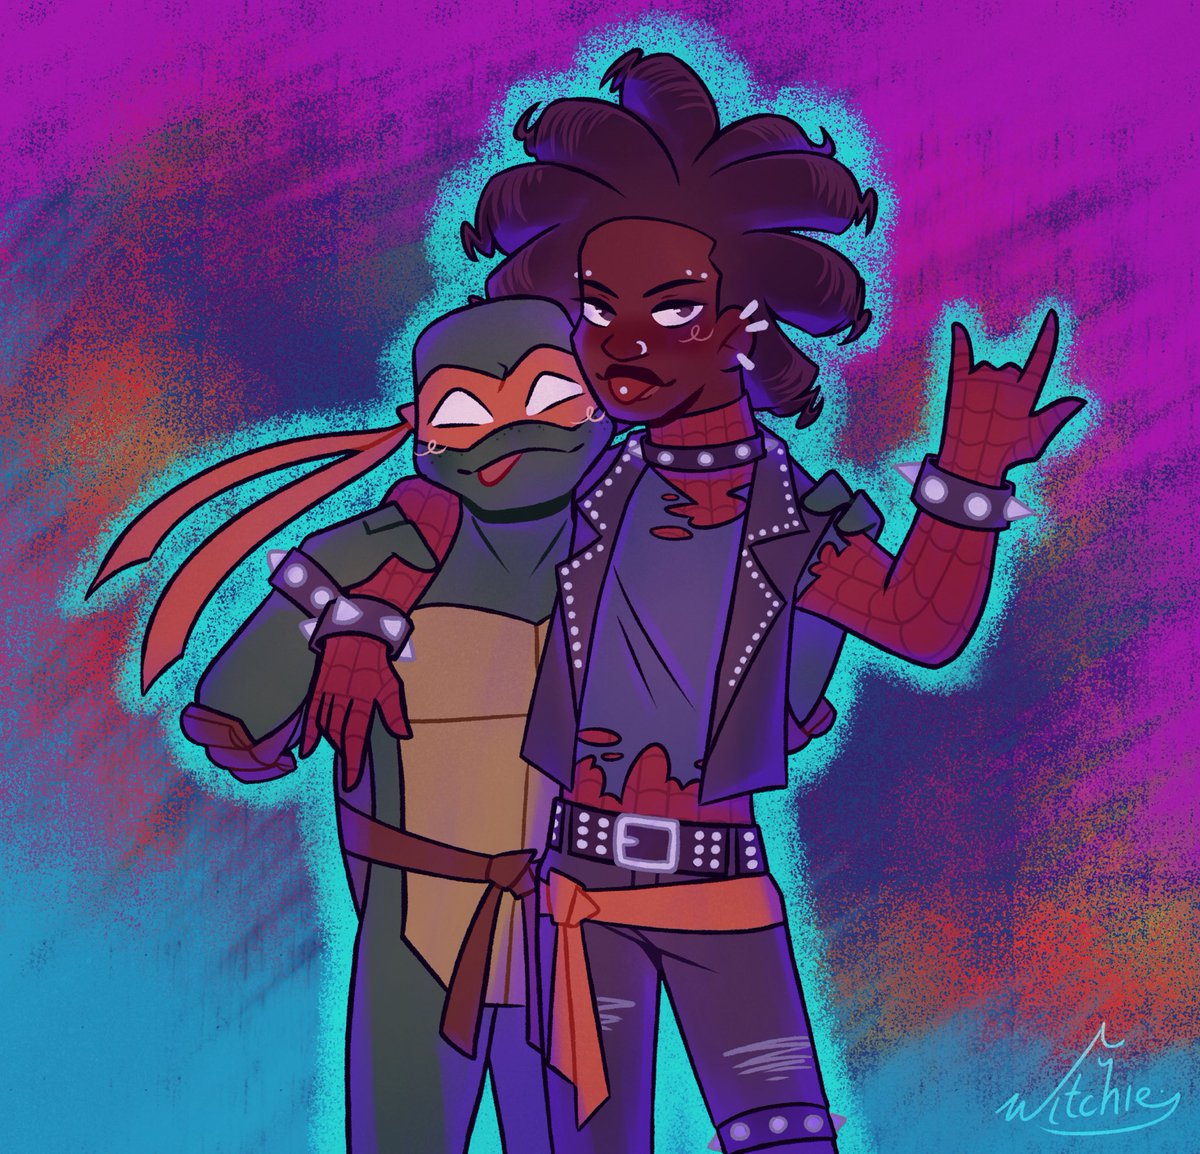 After watching spiderverse I had the urge to draw some #LoversRock cuz they are bf 
@turrondeluxe I’m tagging you cuz you’re the one who open my eyes to them :)